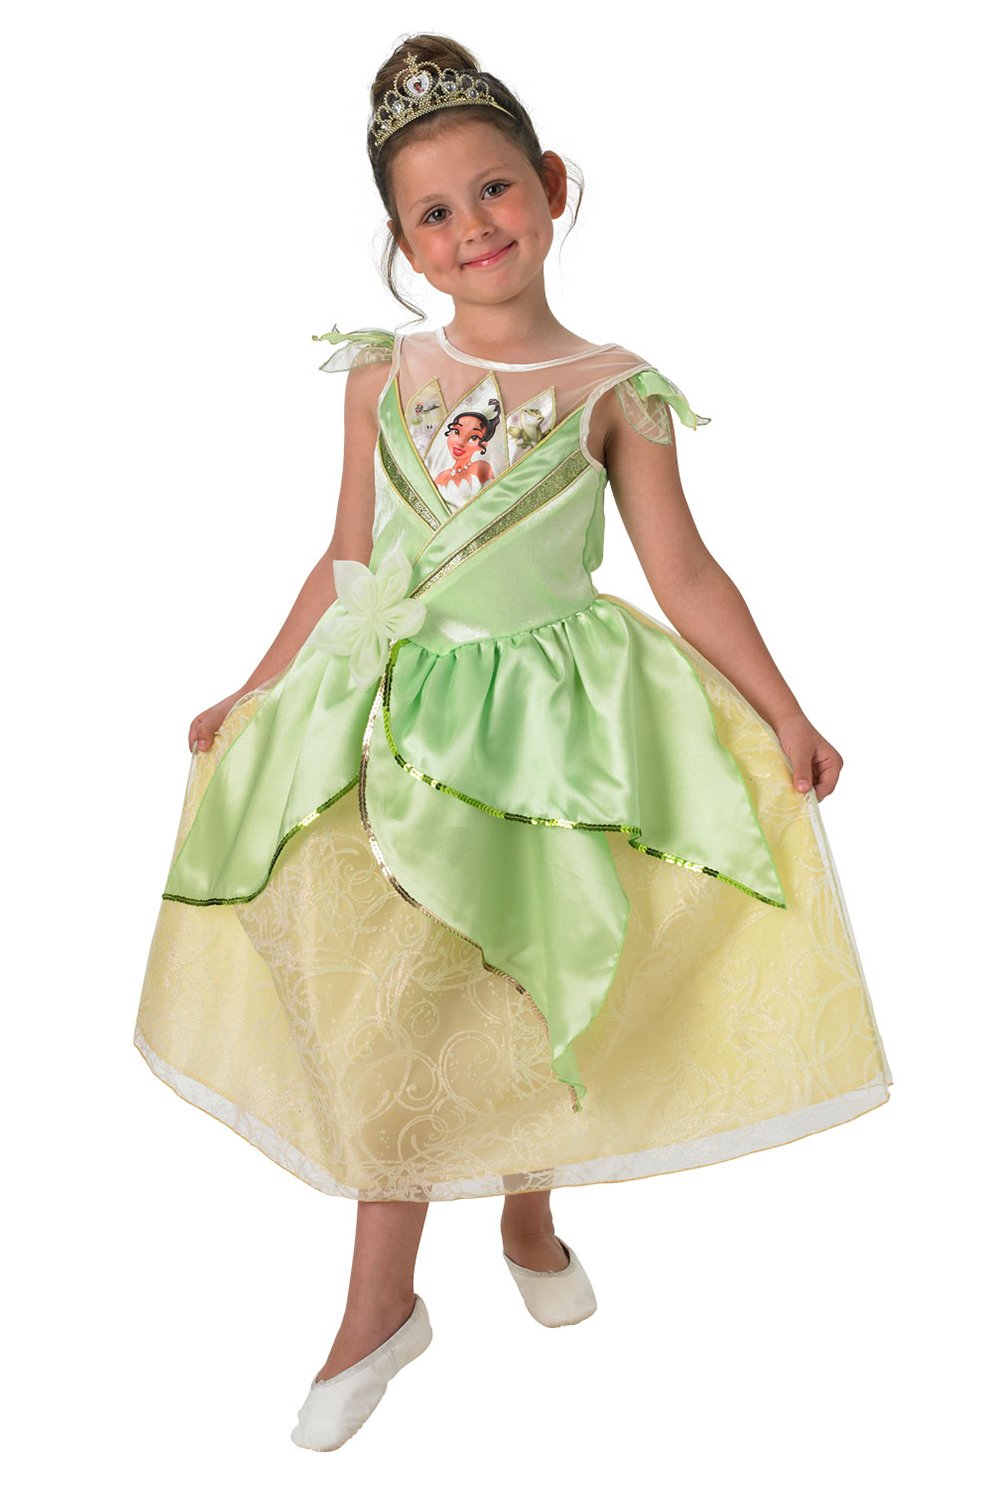 Rubies-Costumes-Disney-Princess-and-The-Frog-Shimmer-Tiana